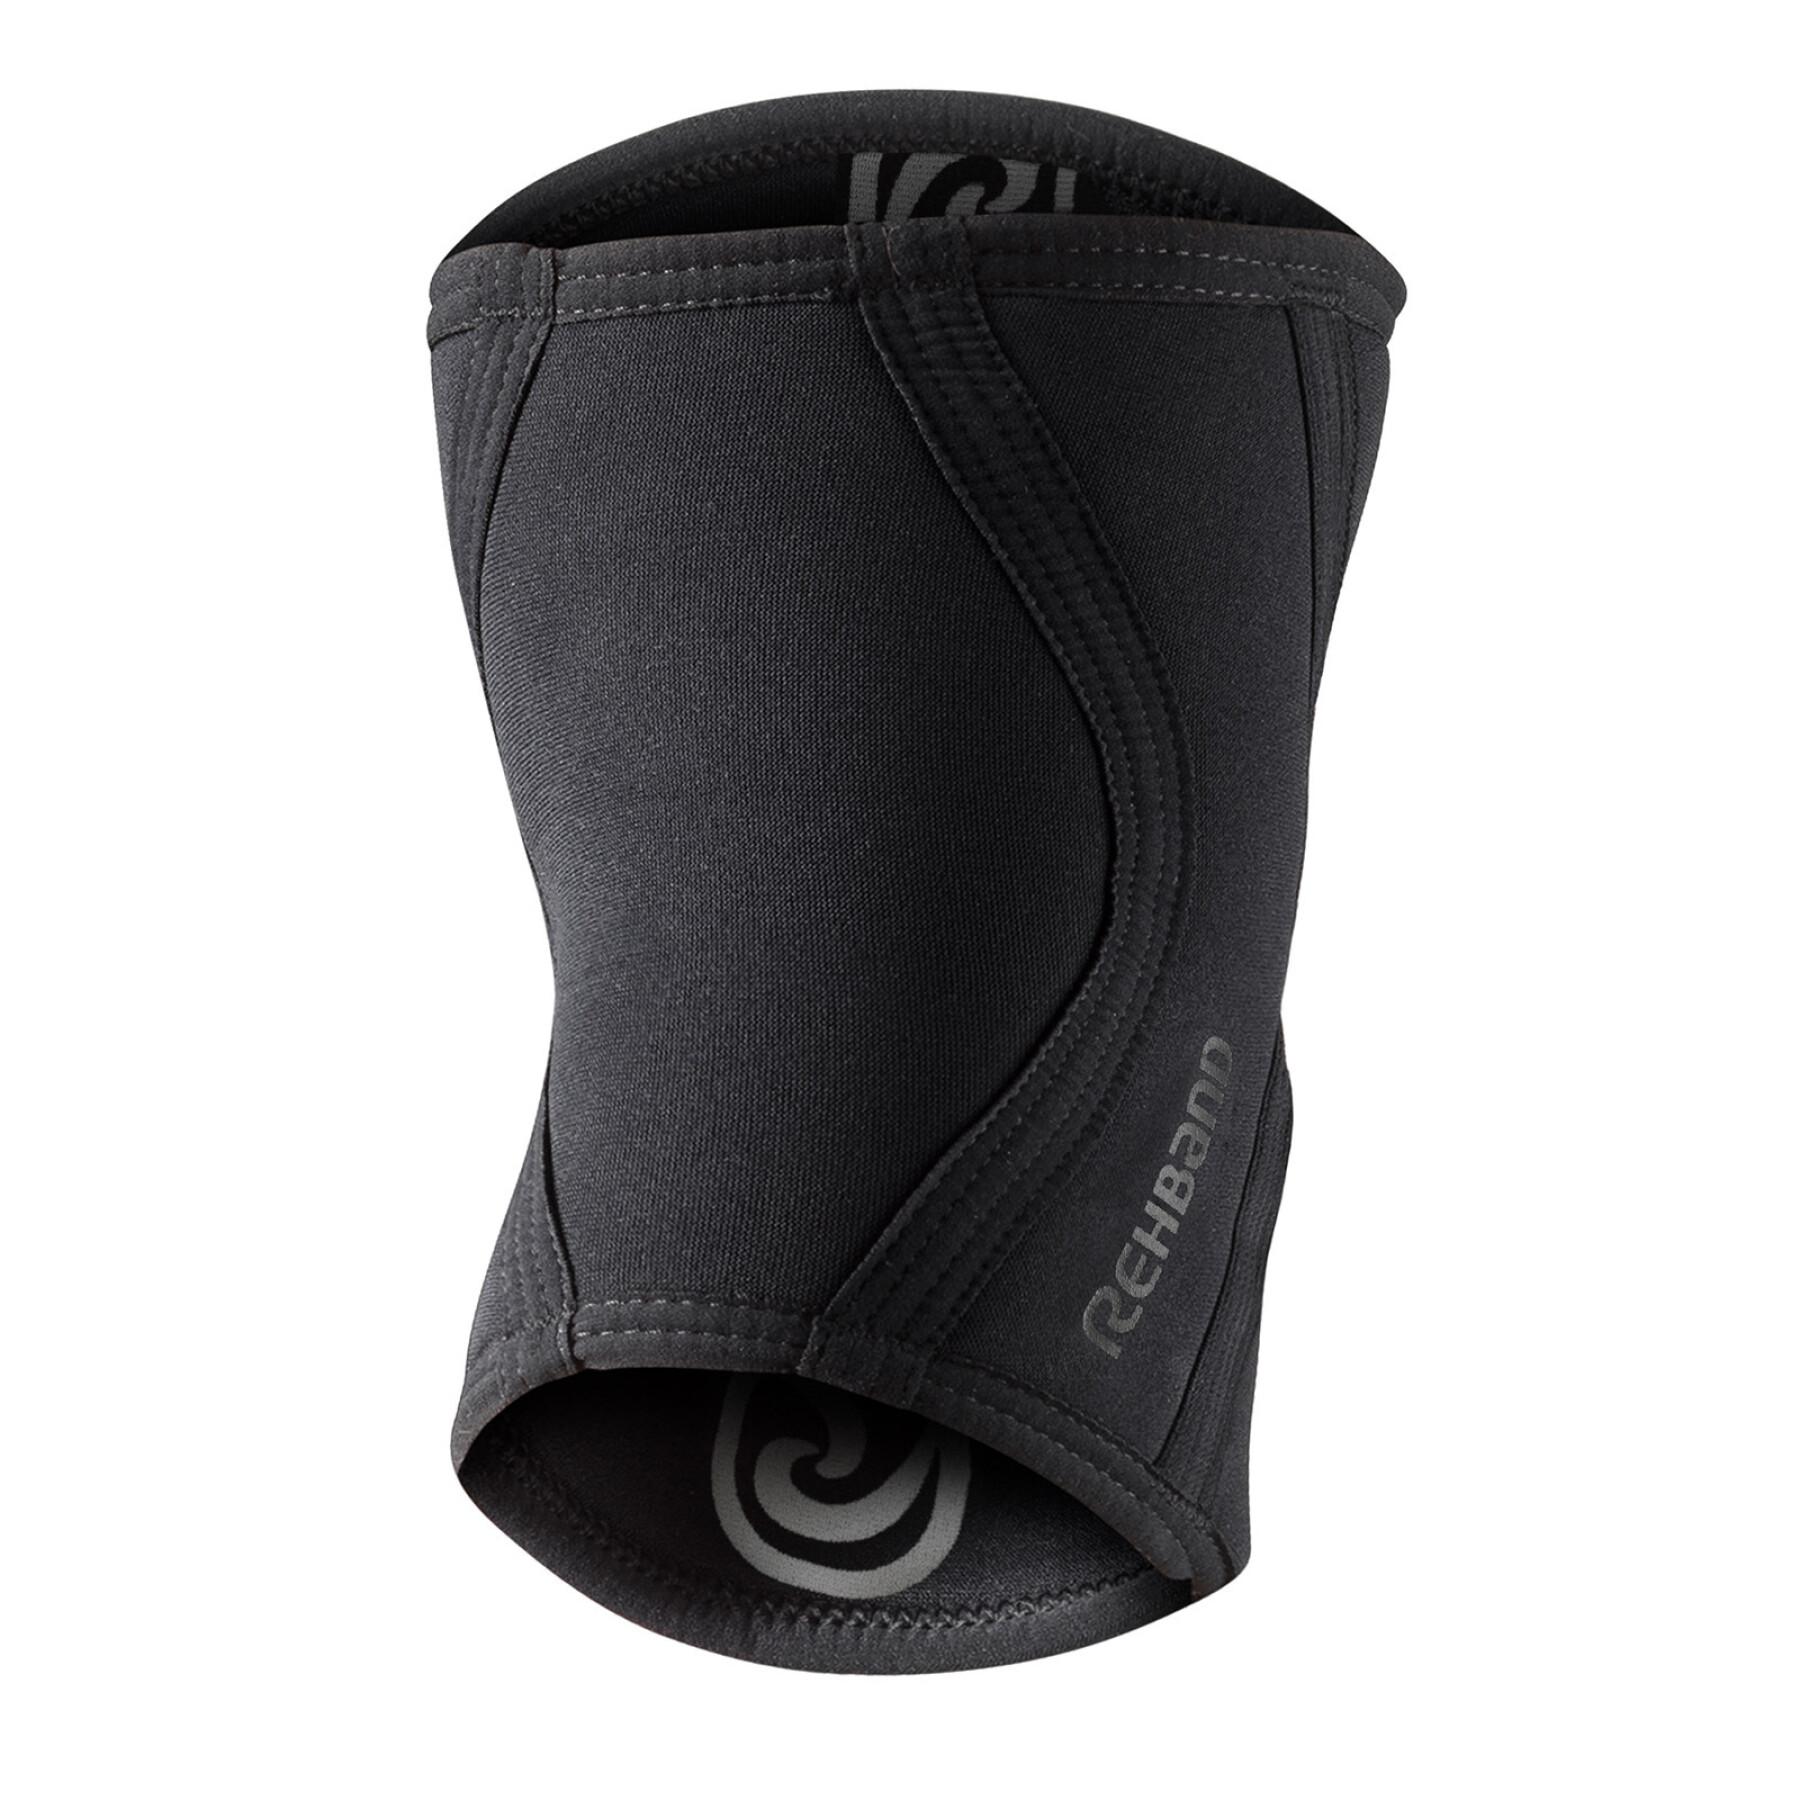 Elbow pads Rehband RX 5 mm